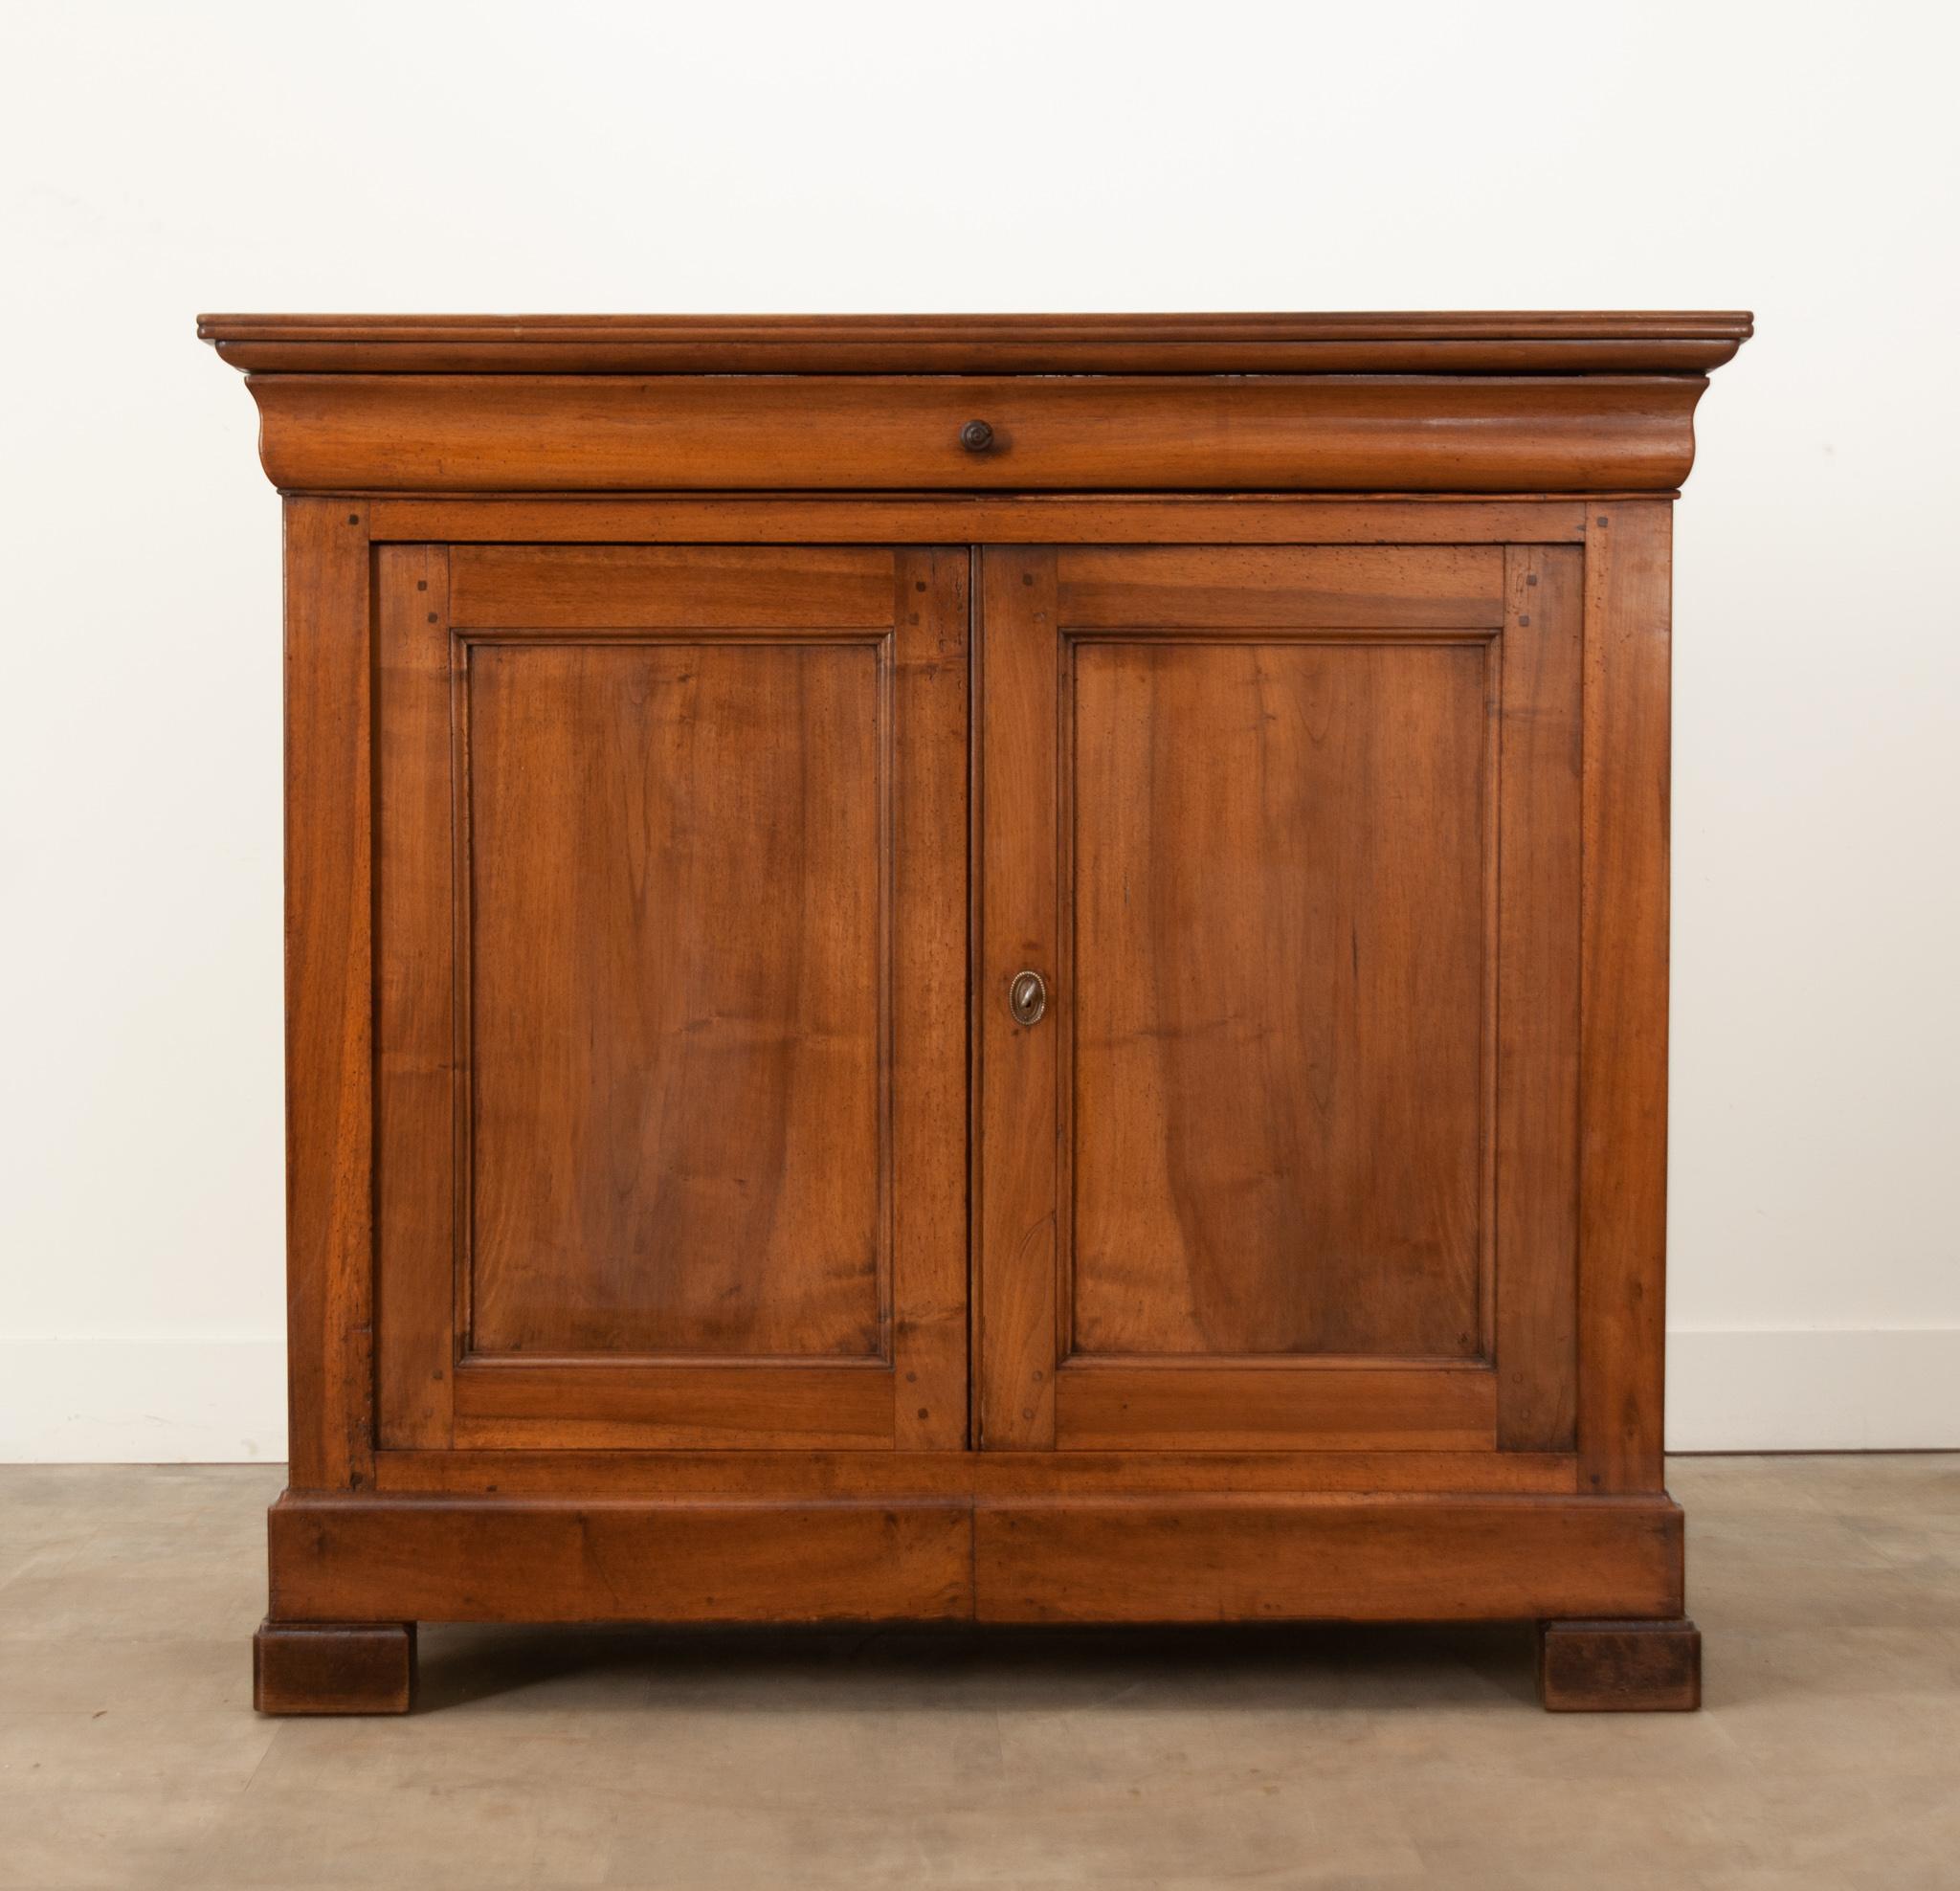 A charming solid walnut buffet hand-crafted in France at the beginning of the reign of Louis Philippe duc d’Orléans, circa 1830. A gorgeously patinated plank top with a molded edge sits over a long shaped frieze drawer with a trimmed wooden pull and